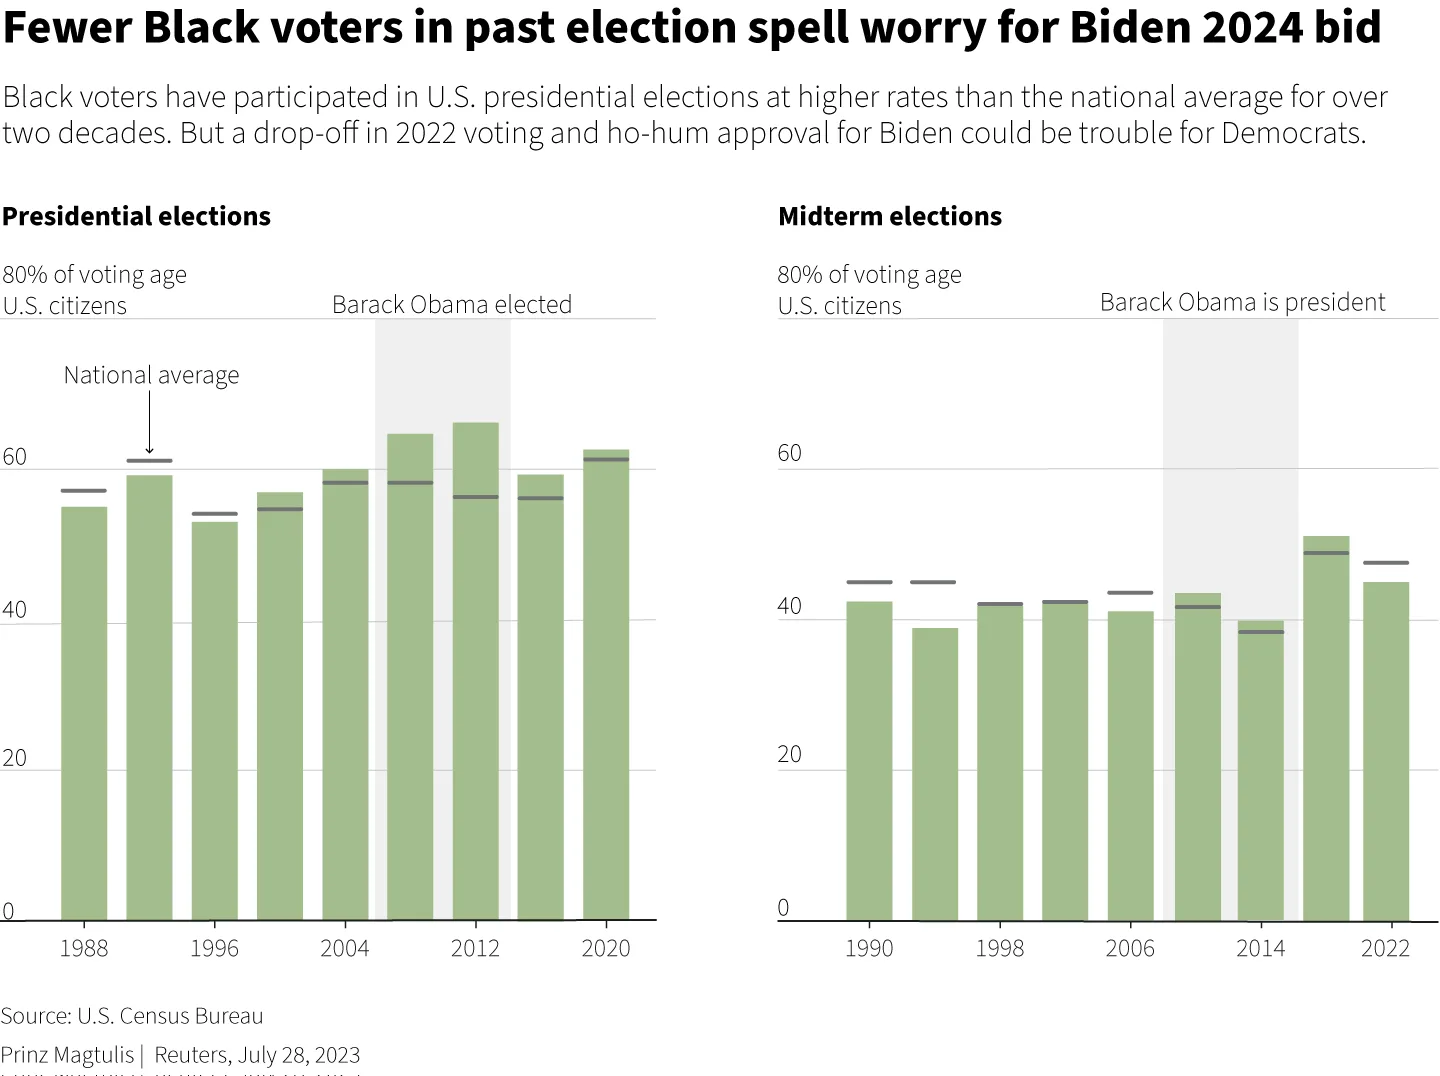 Black voters have participated in U.S. presidential elections at higher rates than the national average for over two decades.